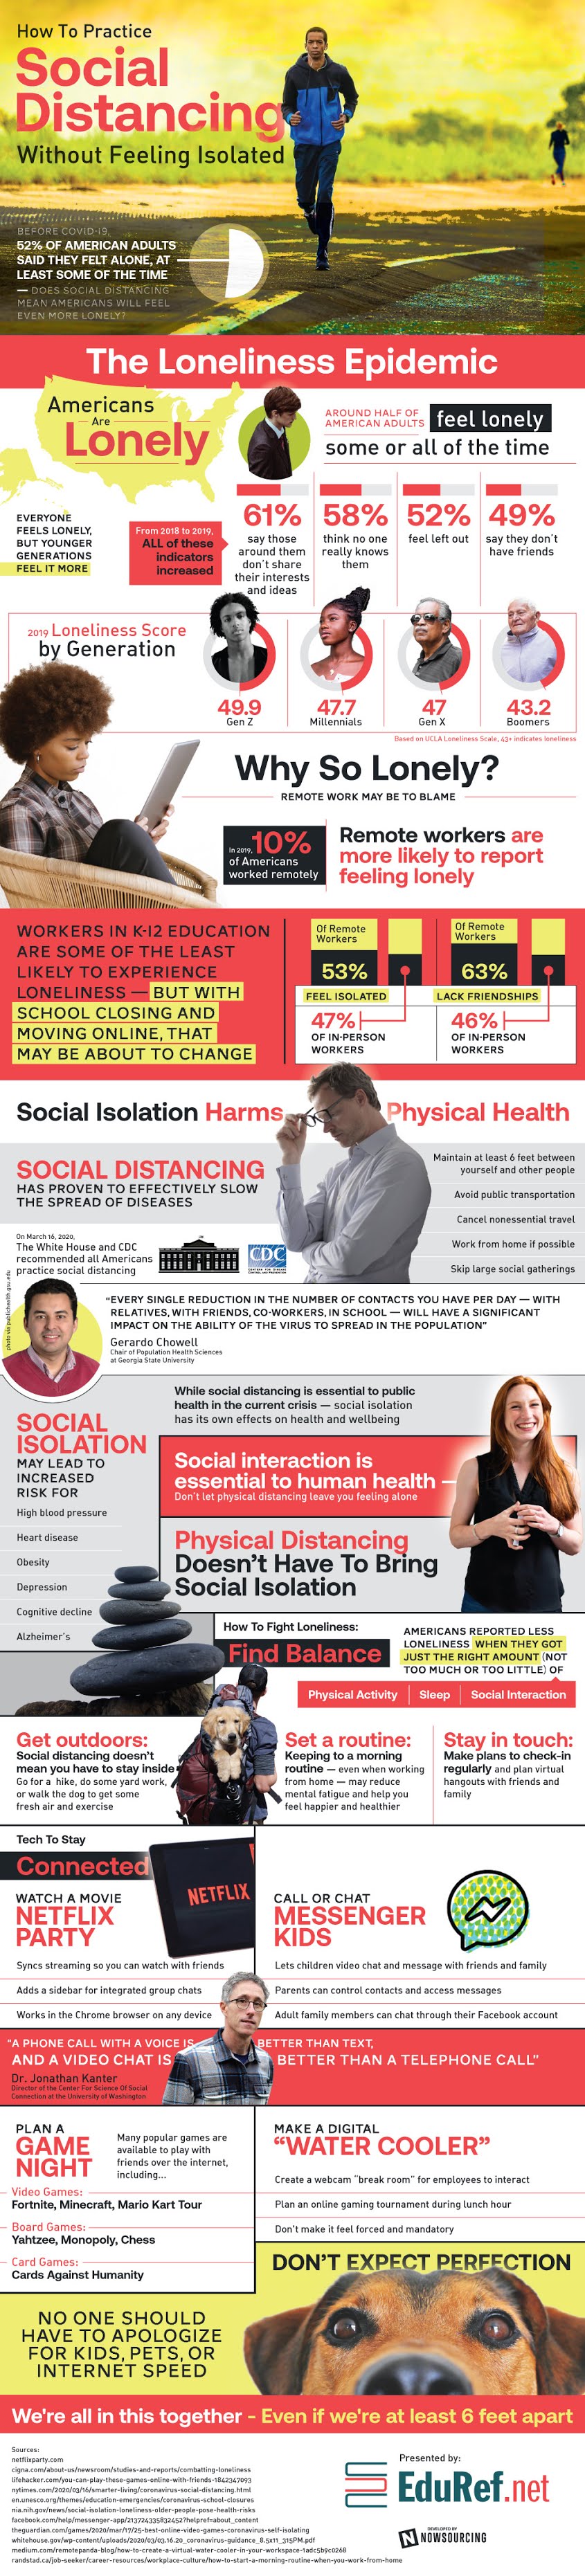 Social Distancing Without Feeling Isolated #infographic